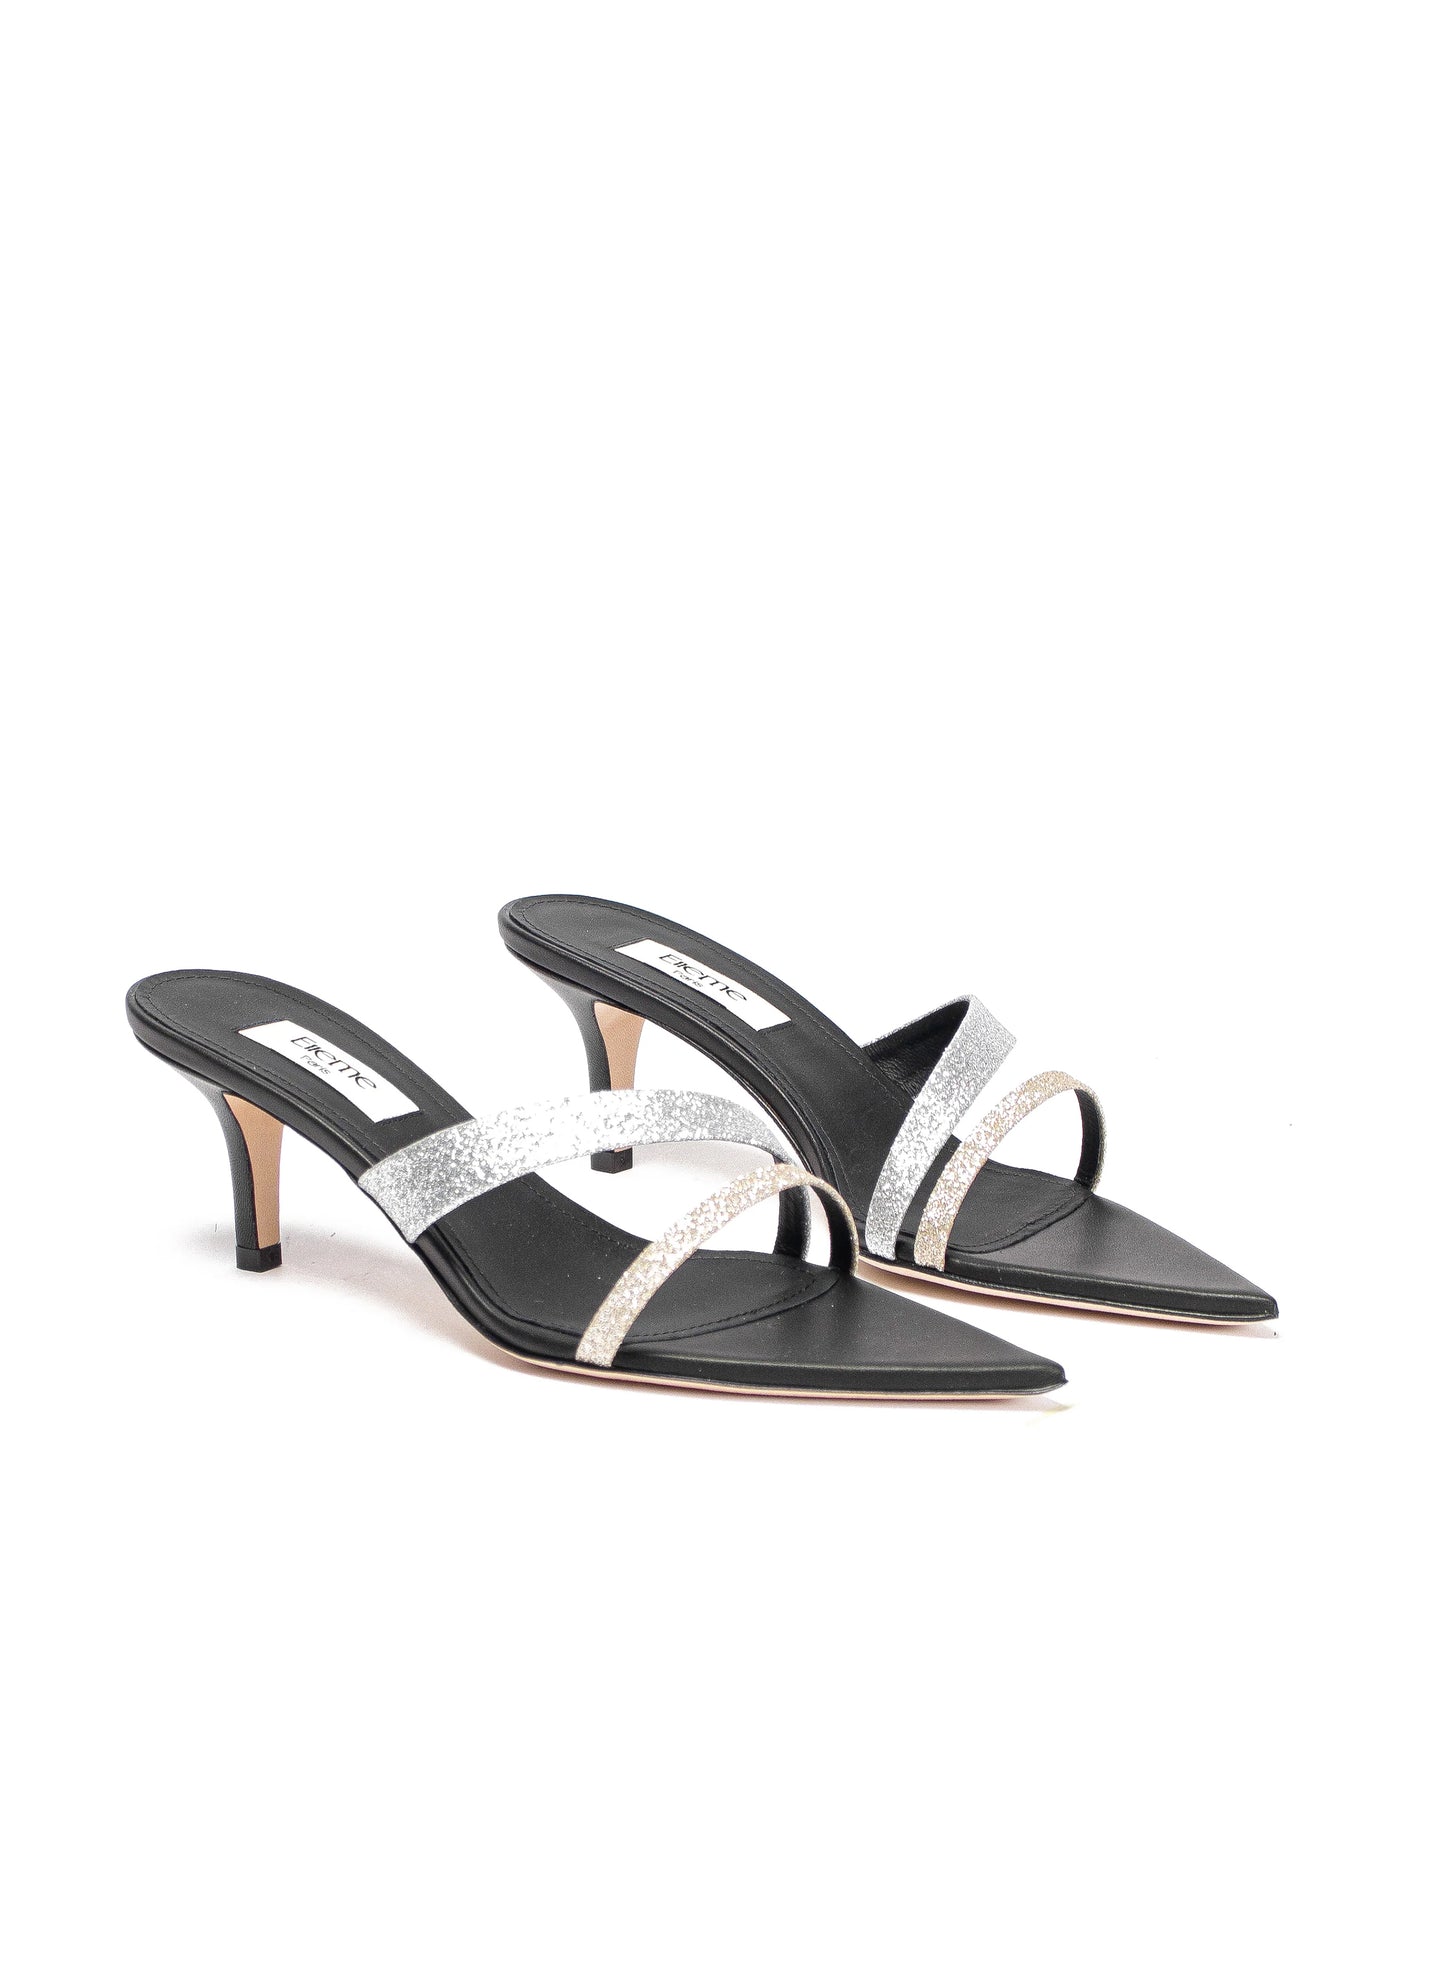 Asymmetric Strap Sandal Leather/Sparkle Silver and Gold